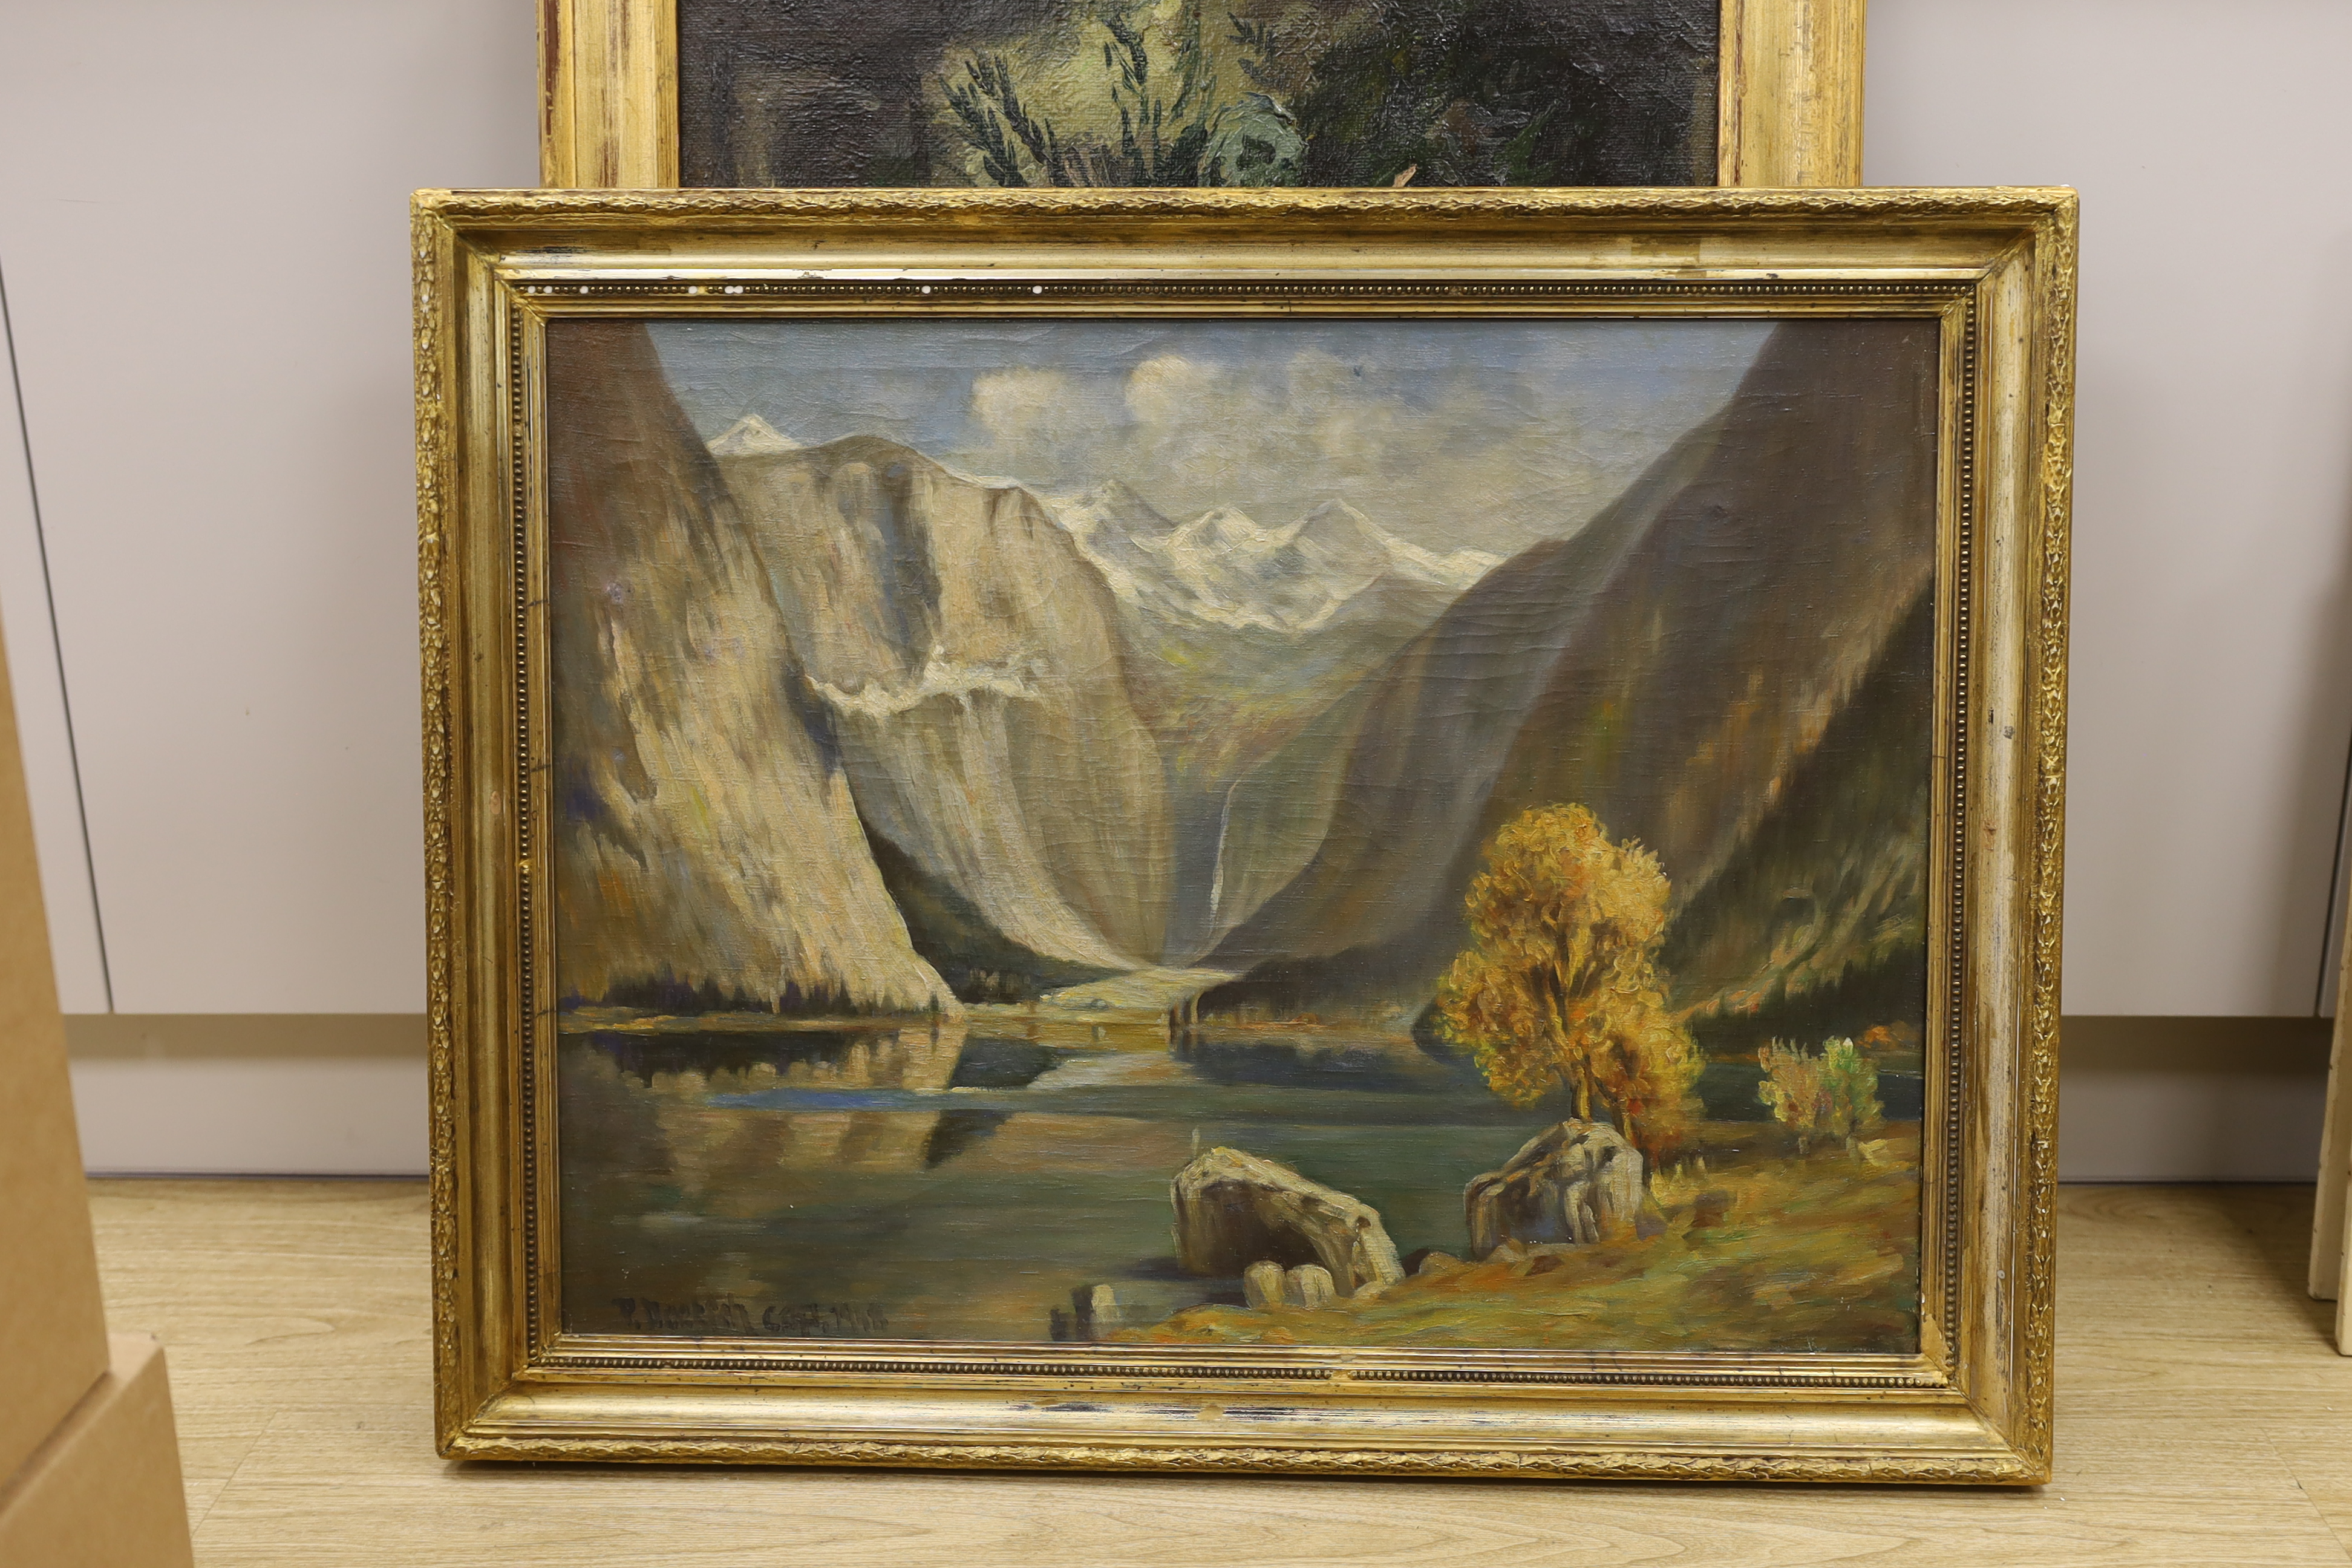 Mid 20th century, oil on canvas, Norwegian Fjord, indistinctly signed and dated 1948 lower left, 59 x 79cm